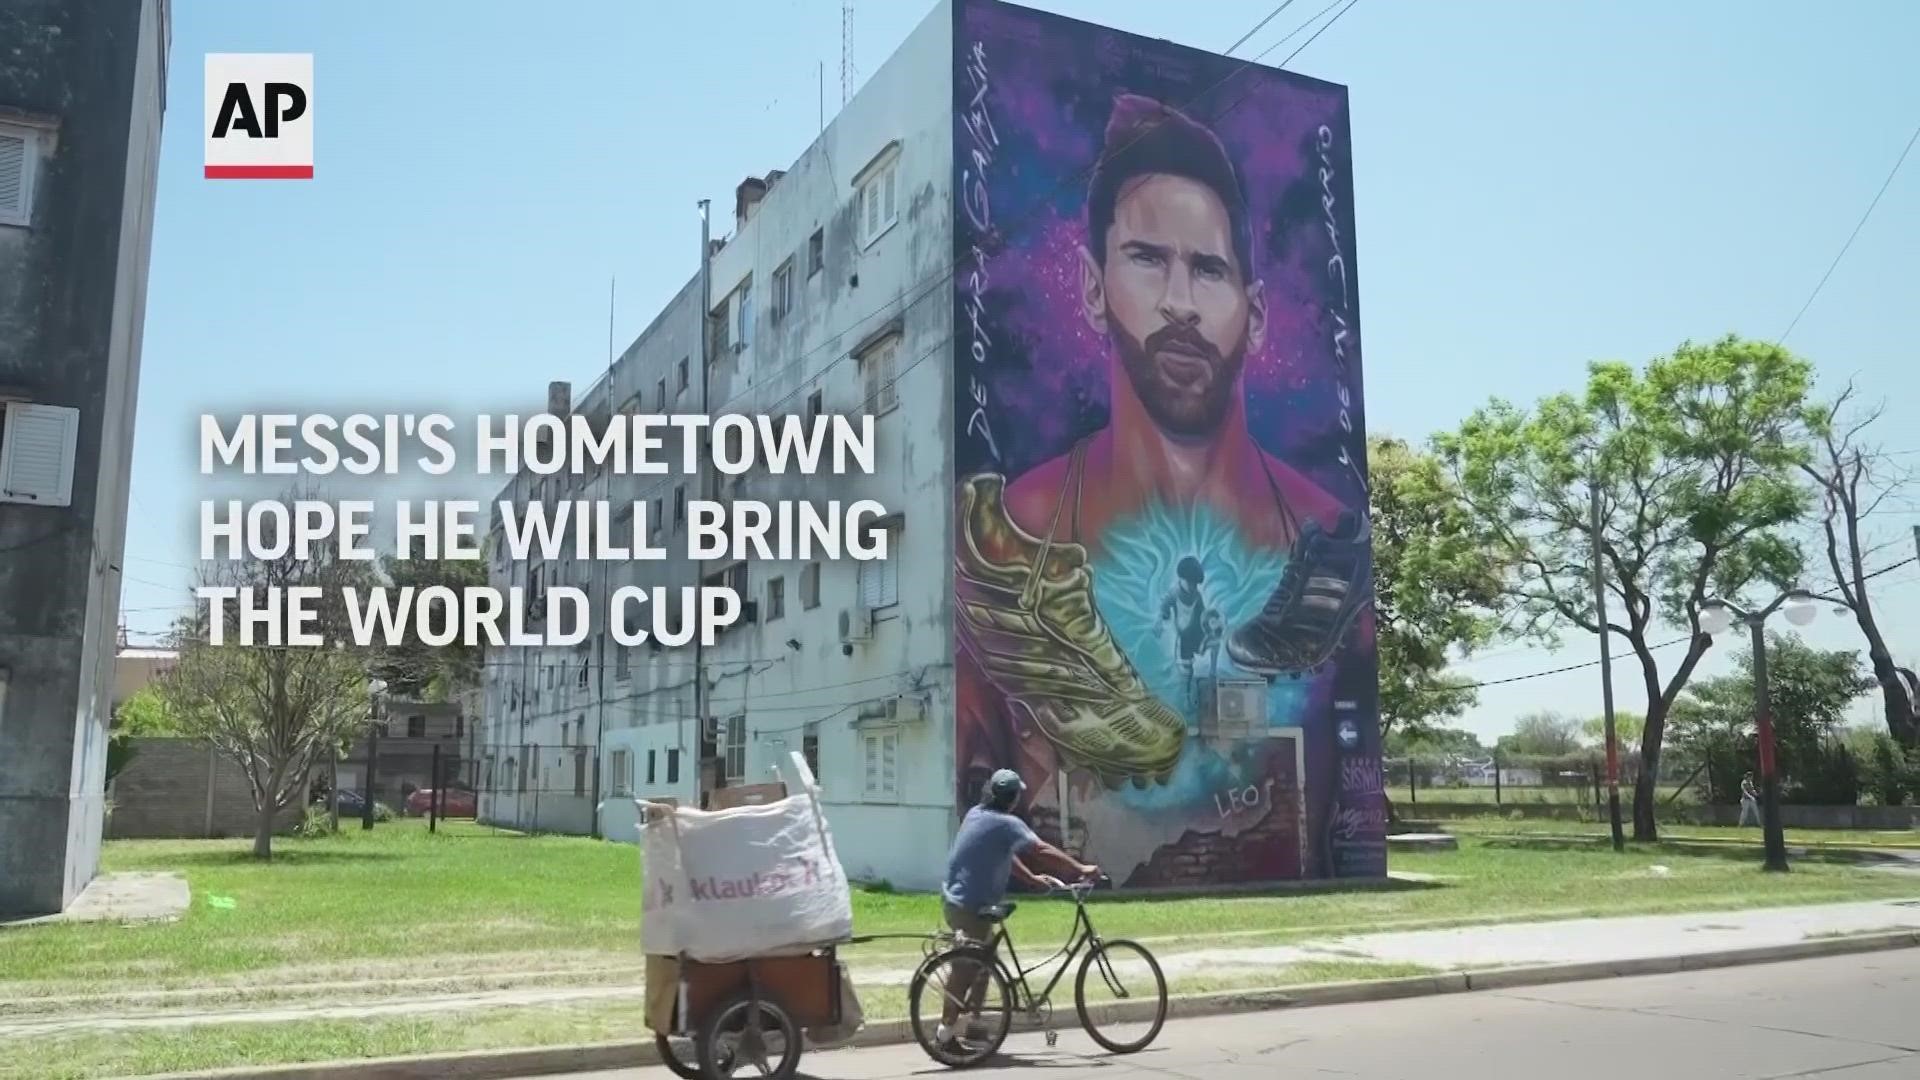 Residents of the city of Rosario, where Argentine soccer star Lionel Messi was born, have high hopes that he will return to the country with the World Cup trophy.